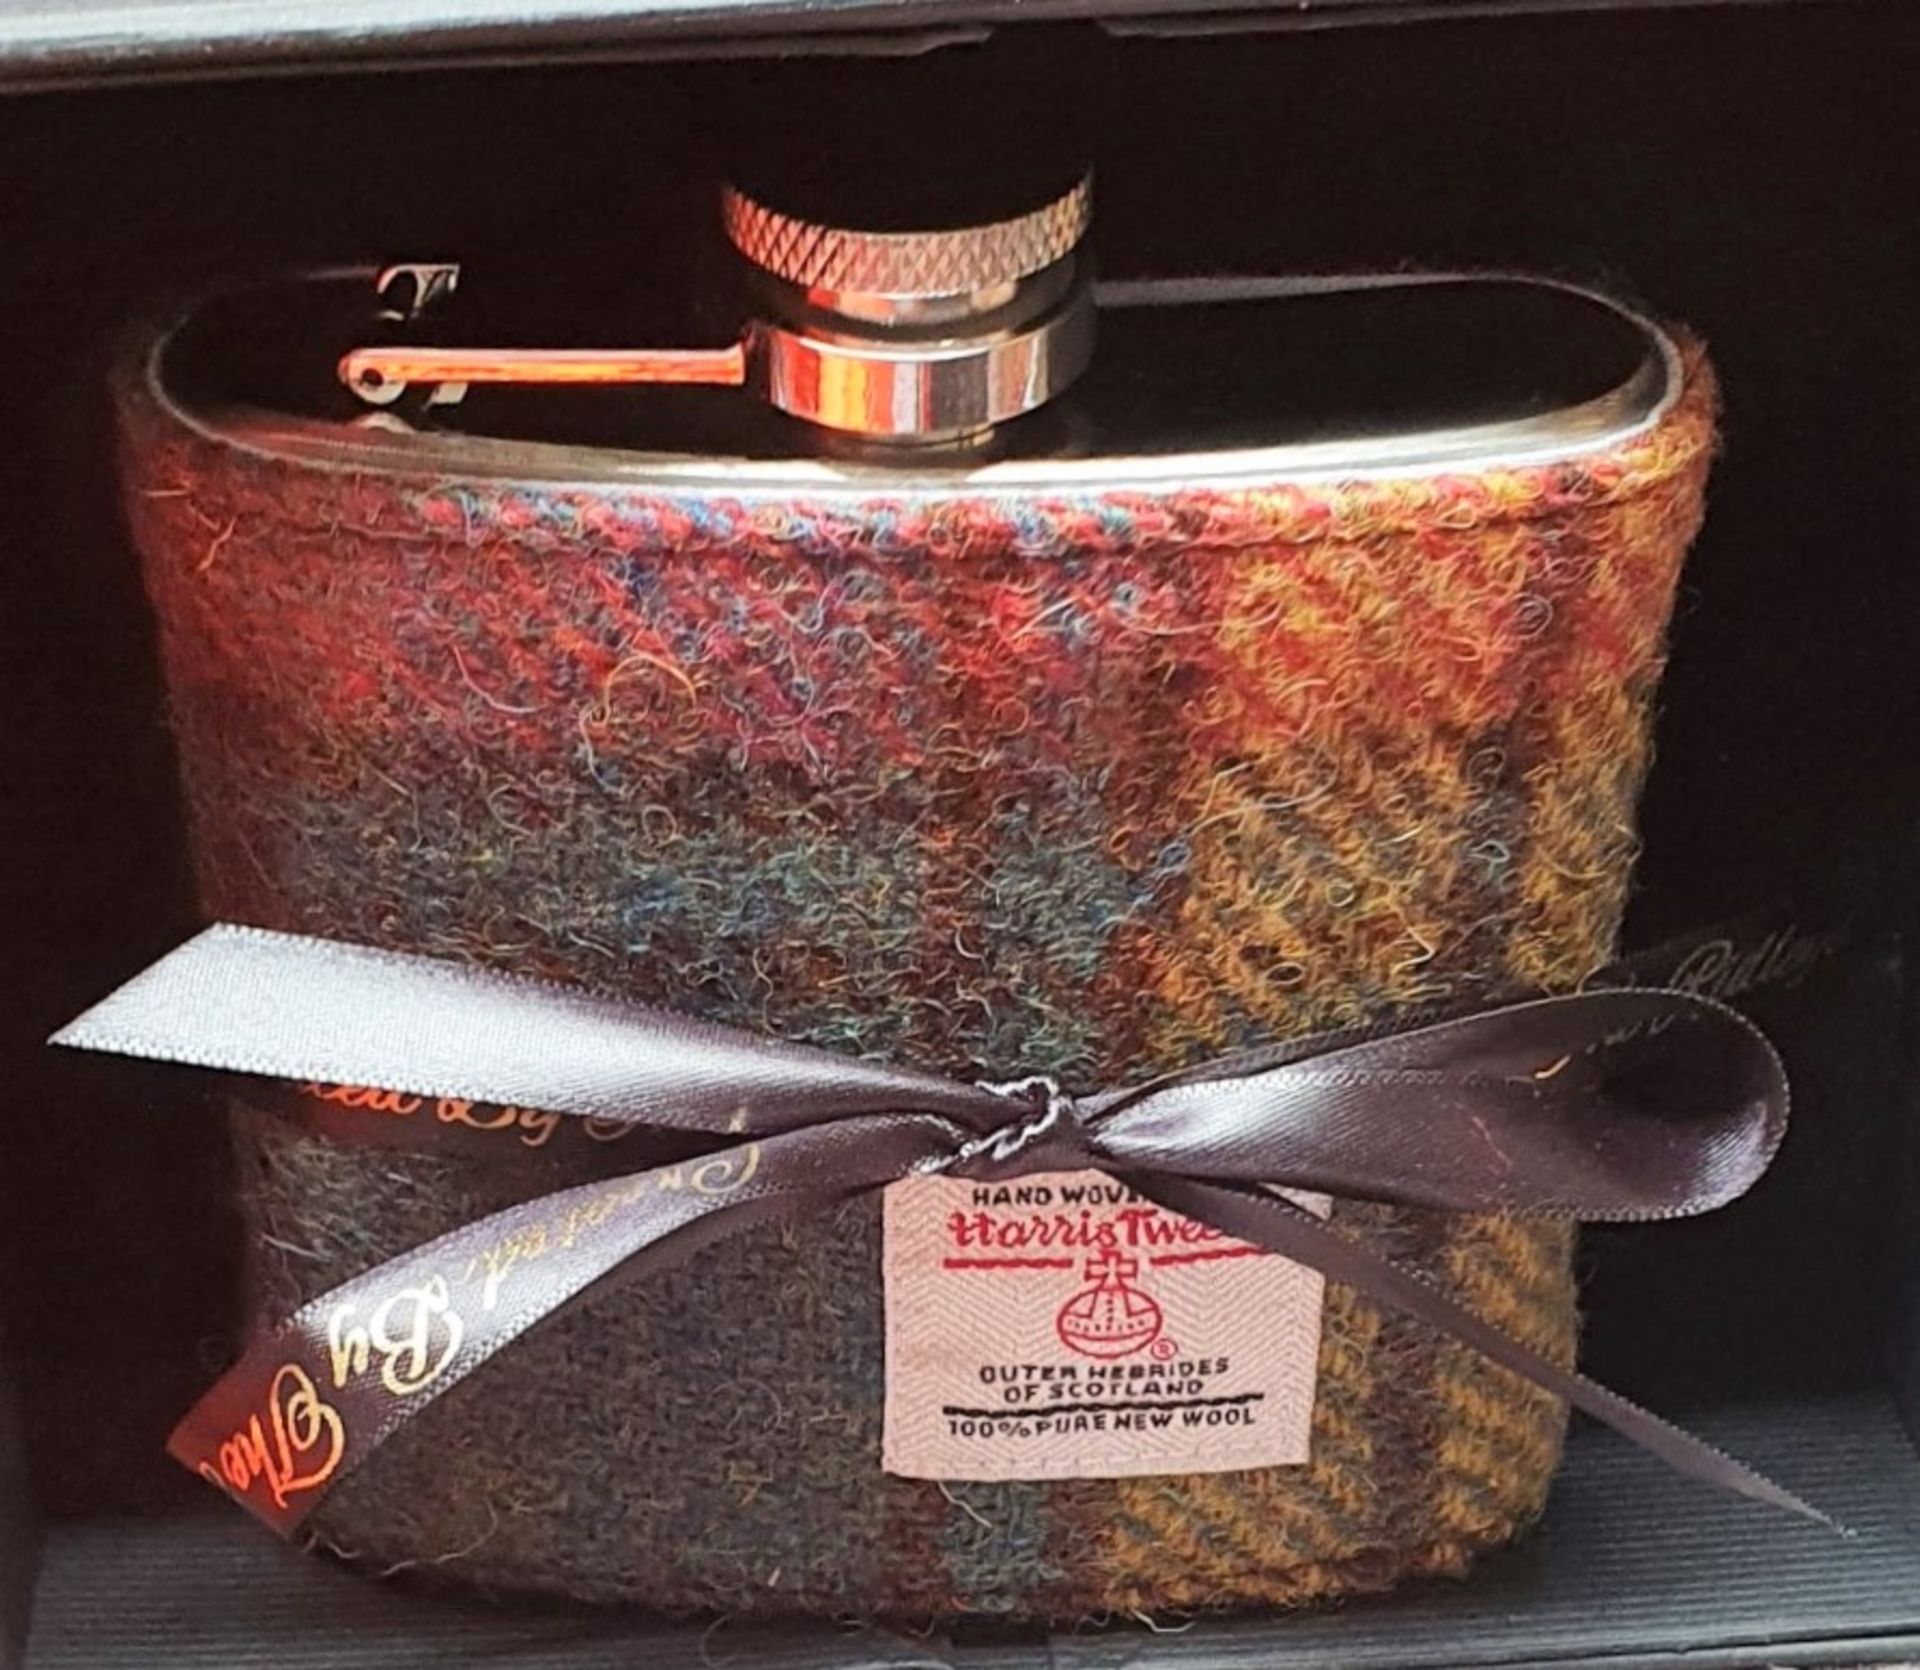 1 x Ridleys Handwoven Harris Tweed Hip Flask in Gift Box - New  - Ref: TCH223 - CL840 - Location: - Image 2 of 3